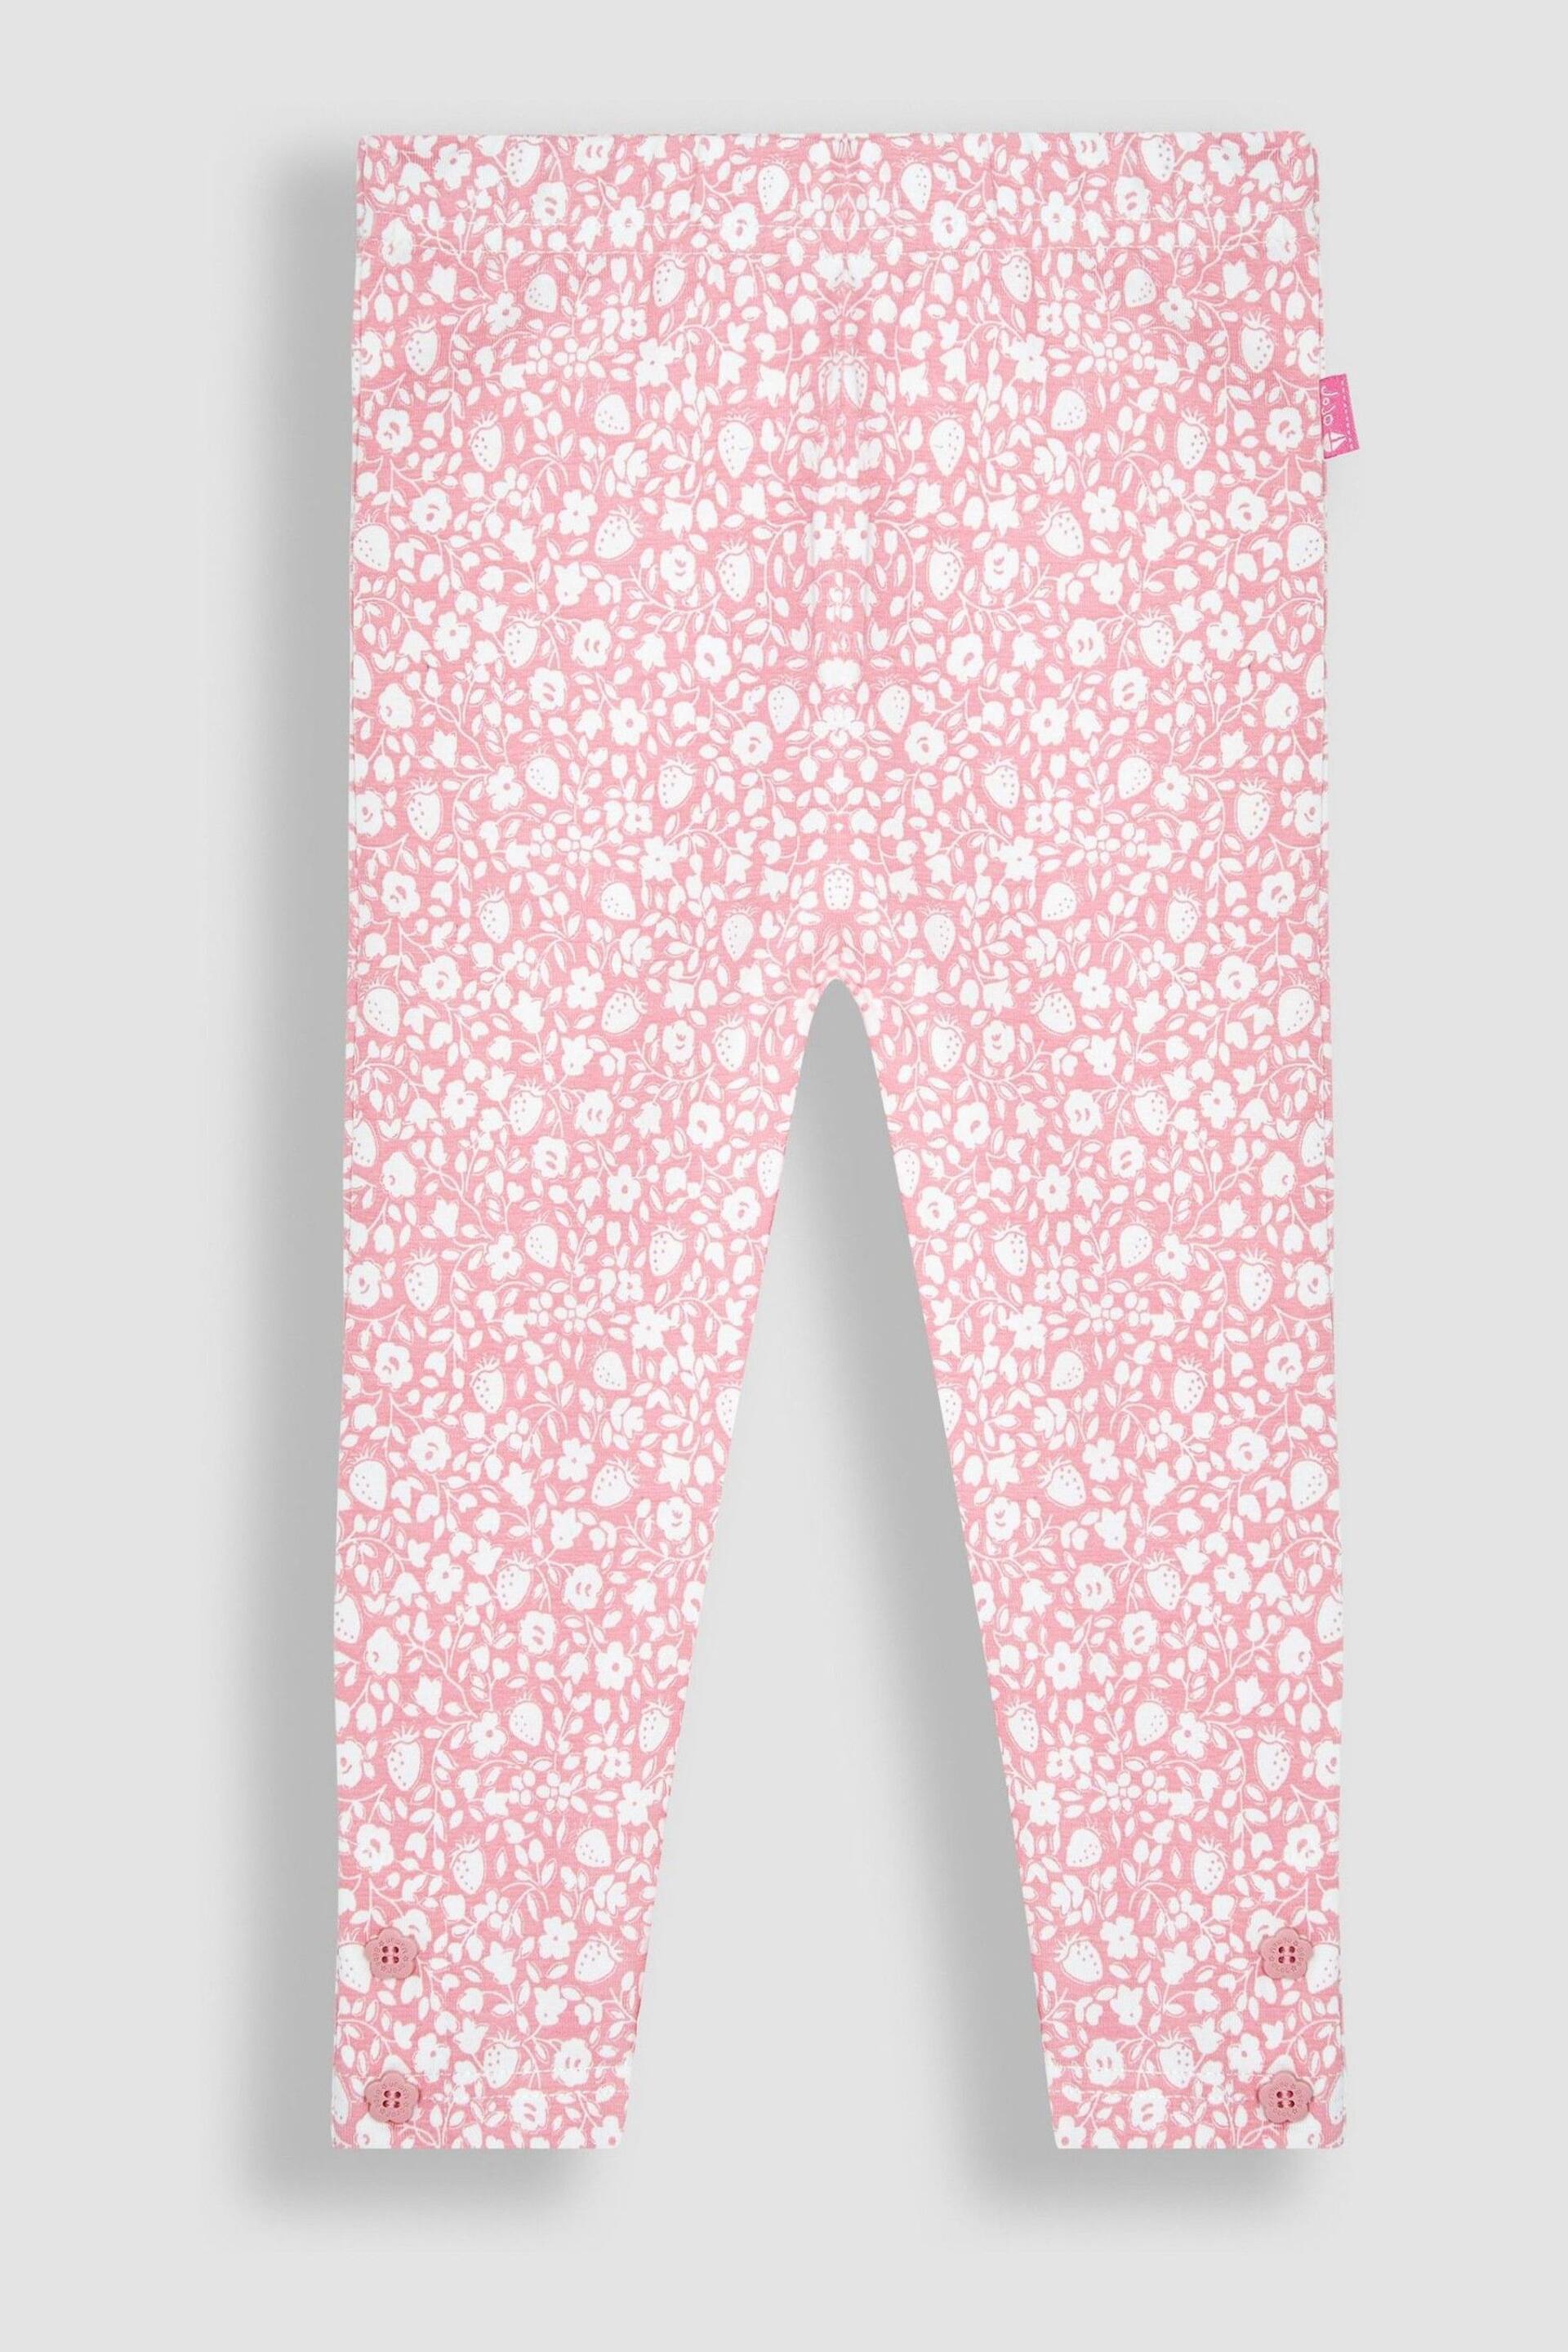 JoJo Maman Bébé Coral Strawberry Ditsy Floral & Pink 2-Pack Leggings - Image 2 of 6